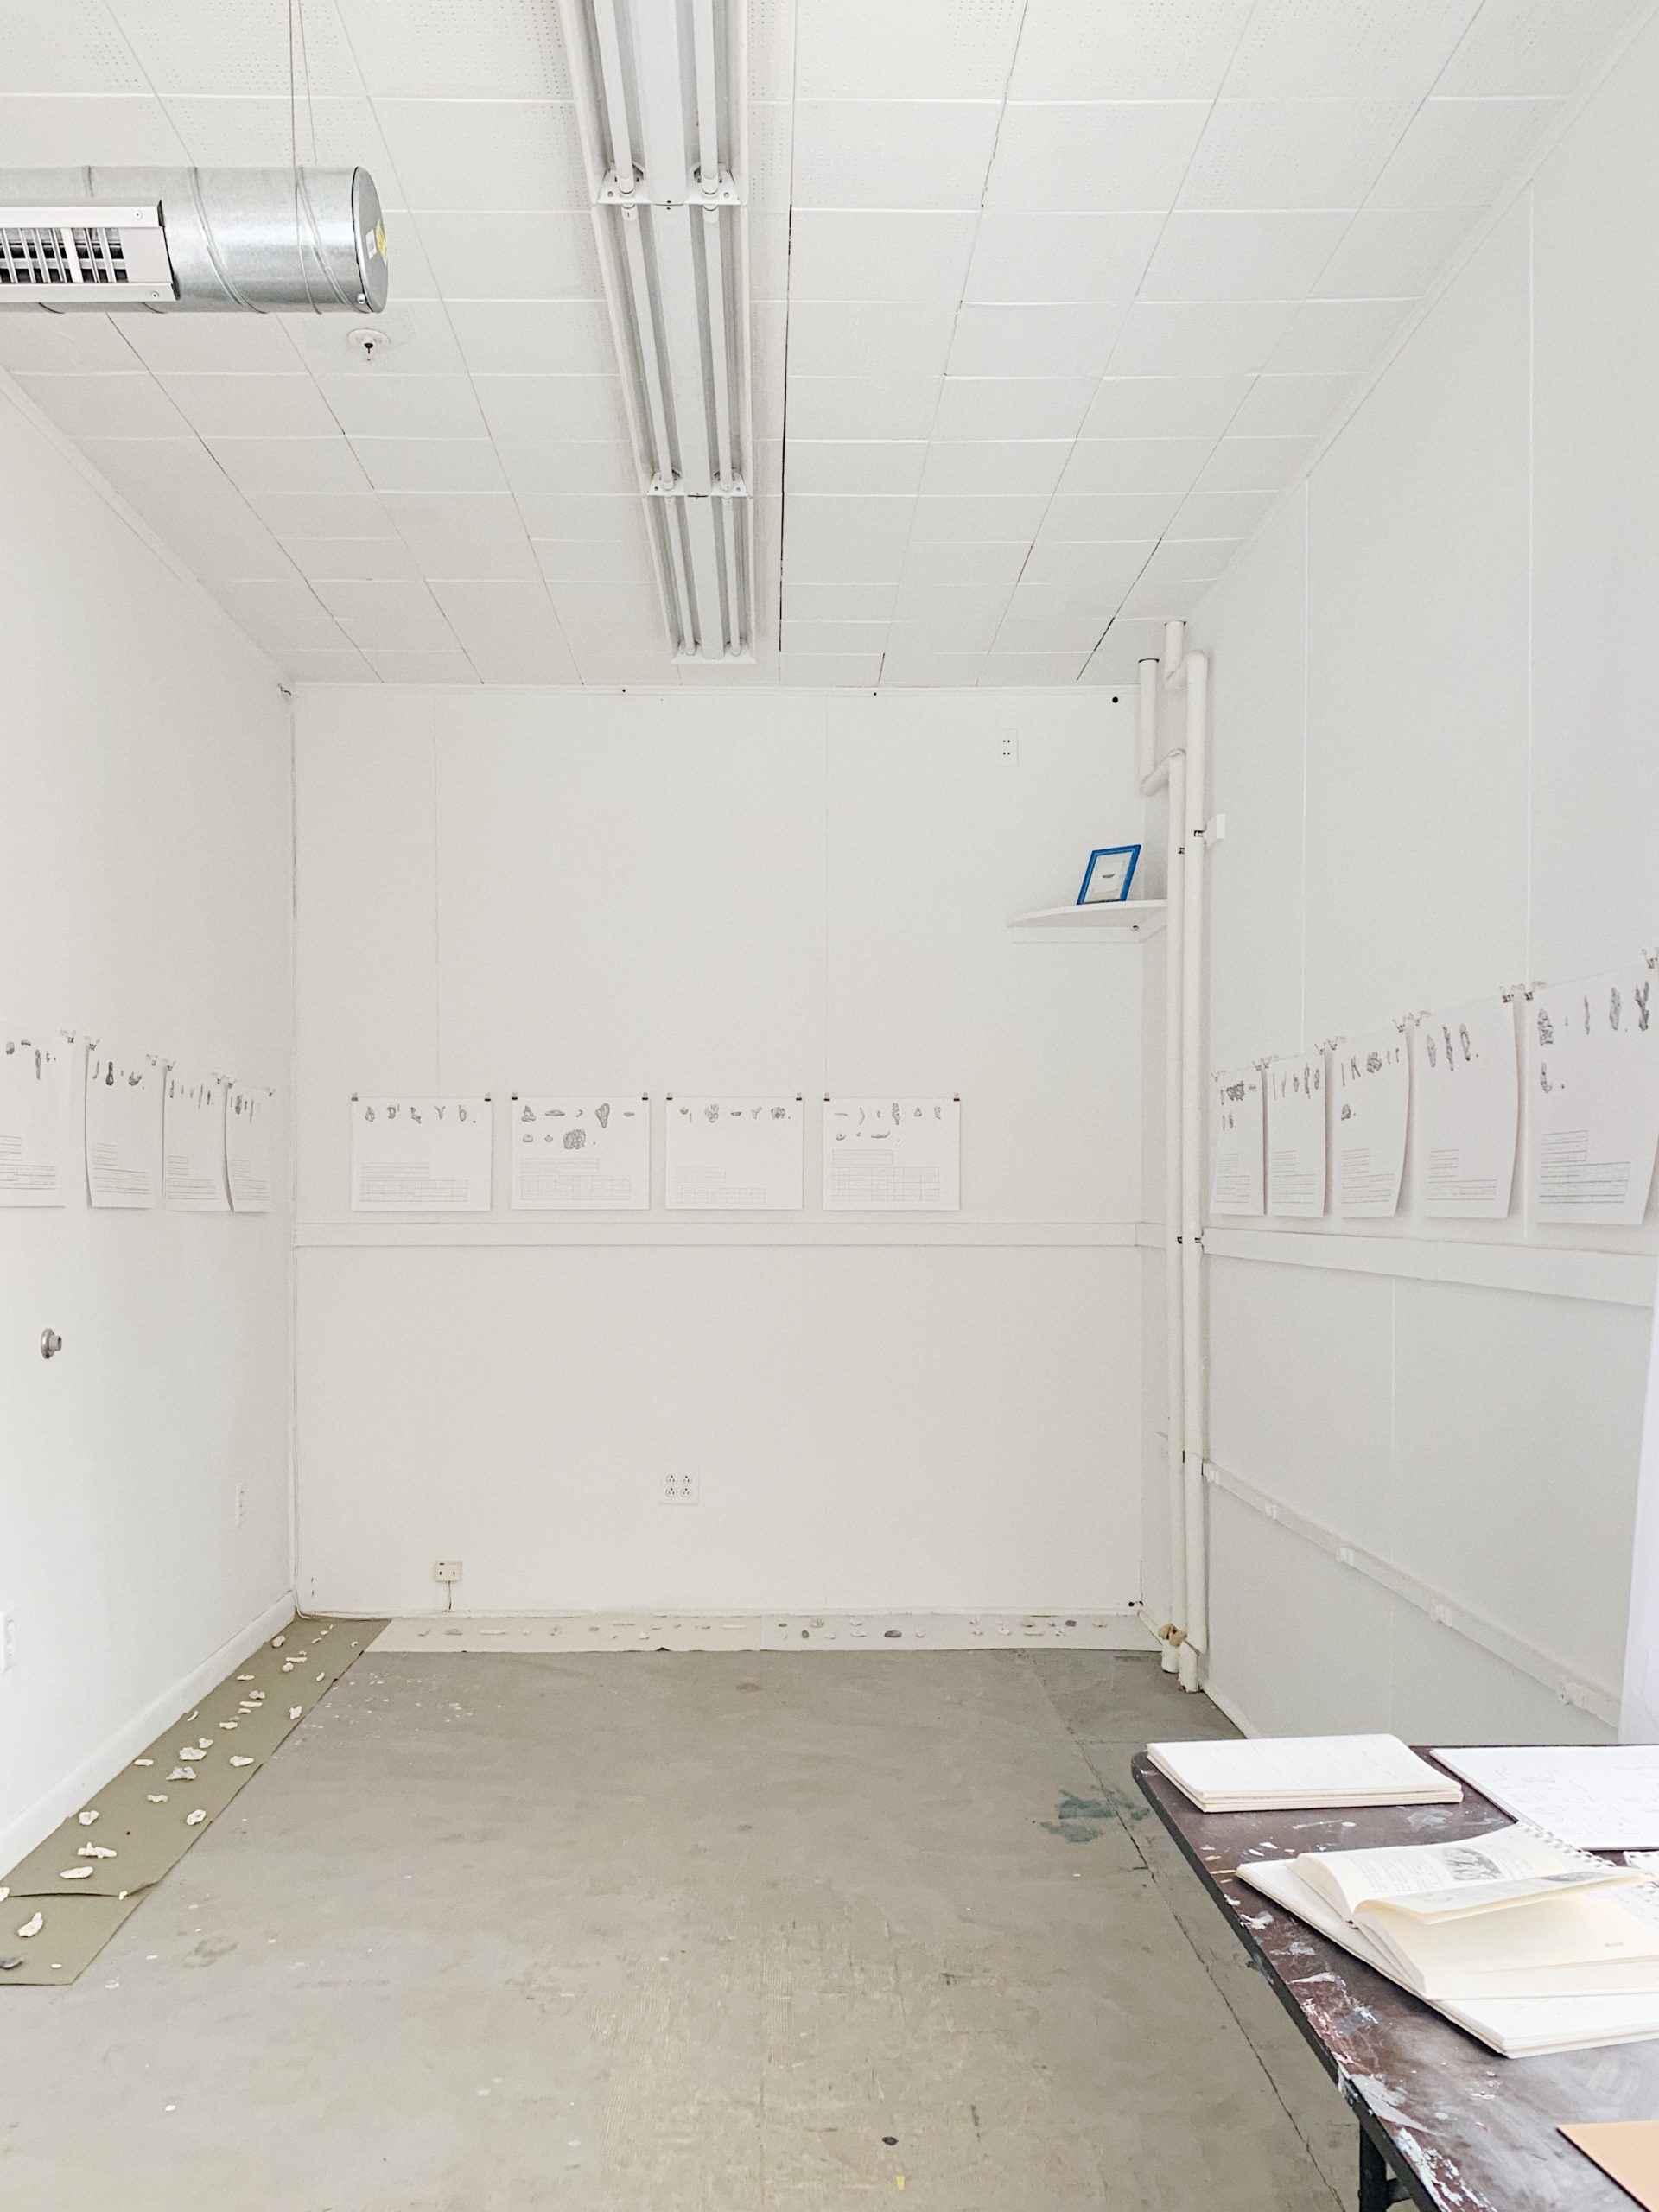 The inside of a white studio with concrete floor, a work desk in the bottom right corner with open books on it, and papers with drawings hanging up on the walls.